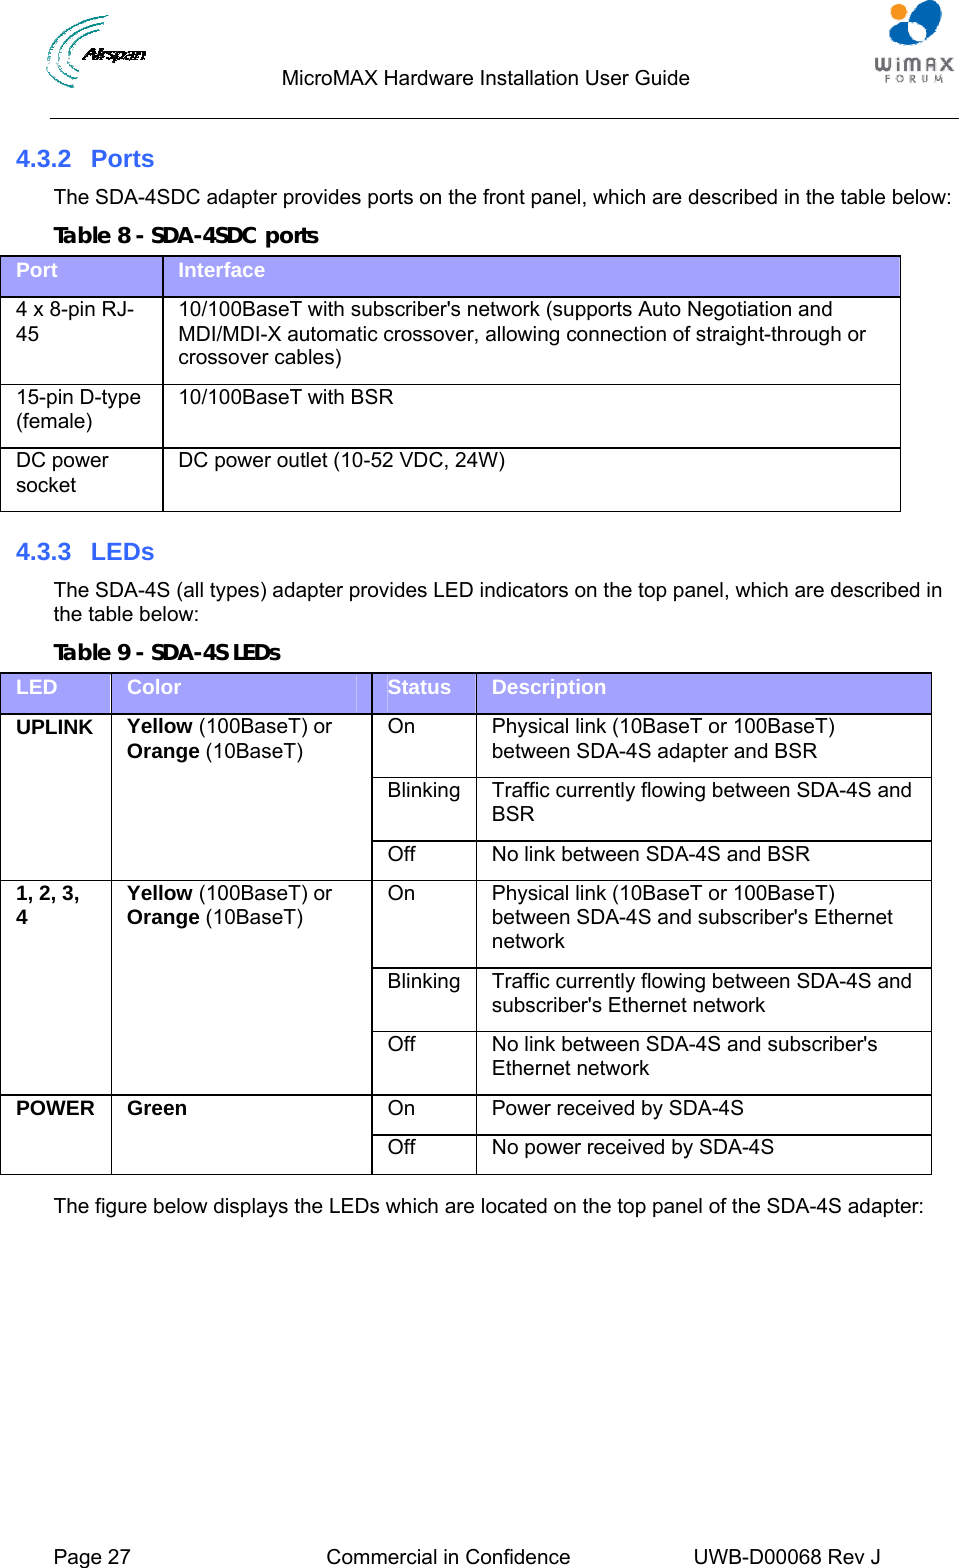                                  MicroMAX Hardware Installation User Guide     Page 27  Commercial in Confidence  UWB-D00068 Rev J   4.3.2 Ports The SDA-4SDC adapter provides ports on the front panel, which are described in the table below: Table 8 - SDA-4SDC ports Port  Interface 4 x 8-pin RJ-45 10/100BaseT with subscriber&apos;s network (supports Auto Negotiation and MDI/MDI-X automatic crossover, allowing connection of straight-through or crossover cables) 15-pin D-type (female) 10/100BaseT with BSR DC power socket DC power outlet (10-52 VDC, 24W) 4.3.3 LEDs The SDA-4S (all types) adapter provides LED indicators on the top panel, which are described in the table below: Table 9 - SDA-4S LEDs LED  Color  Status  Description On  Physical link (10BaseT or 100BaseT) between SDA-4S adapter and BSR Blinking  Traffic currently flowing between SDA-4S and BSR UPLINK  Yellow (100BaseT) or Orange (10BaseT) Off  No link between SDA-4S and BSR On  Physical link (10BaseT or 100BaseT) between SDA-4S and subscriber&apos;s Ethernet network Blinking  Traffic currently flowing between SDA-4S and subscriber&apos;s Ethernet network 1, 2, 3, 4  Yellow (100BaseT) or Orange (10BaseT) Off  No link between SDA-4S and subscriber&apos;s Ethernet network On  Power received by SDA-4S POWER Green Off  No power received by SDA-4S  The figure below displays the LEDs which are located on the top panel of the SDA-4S adapter: 